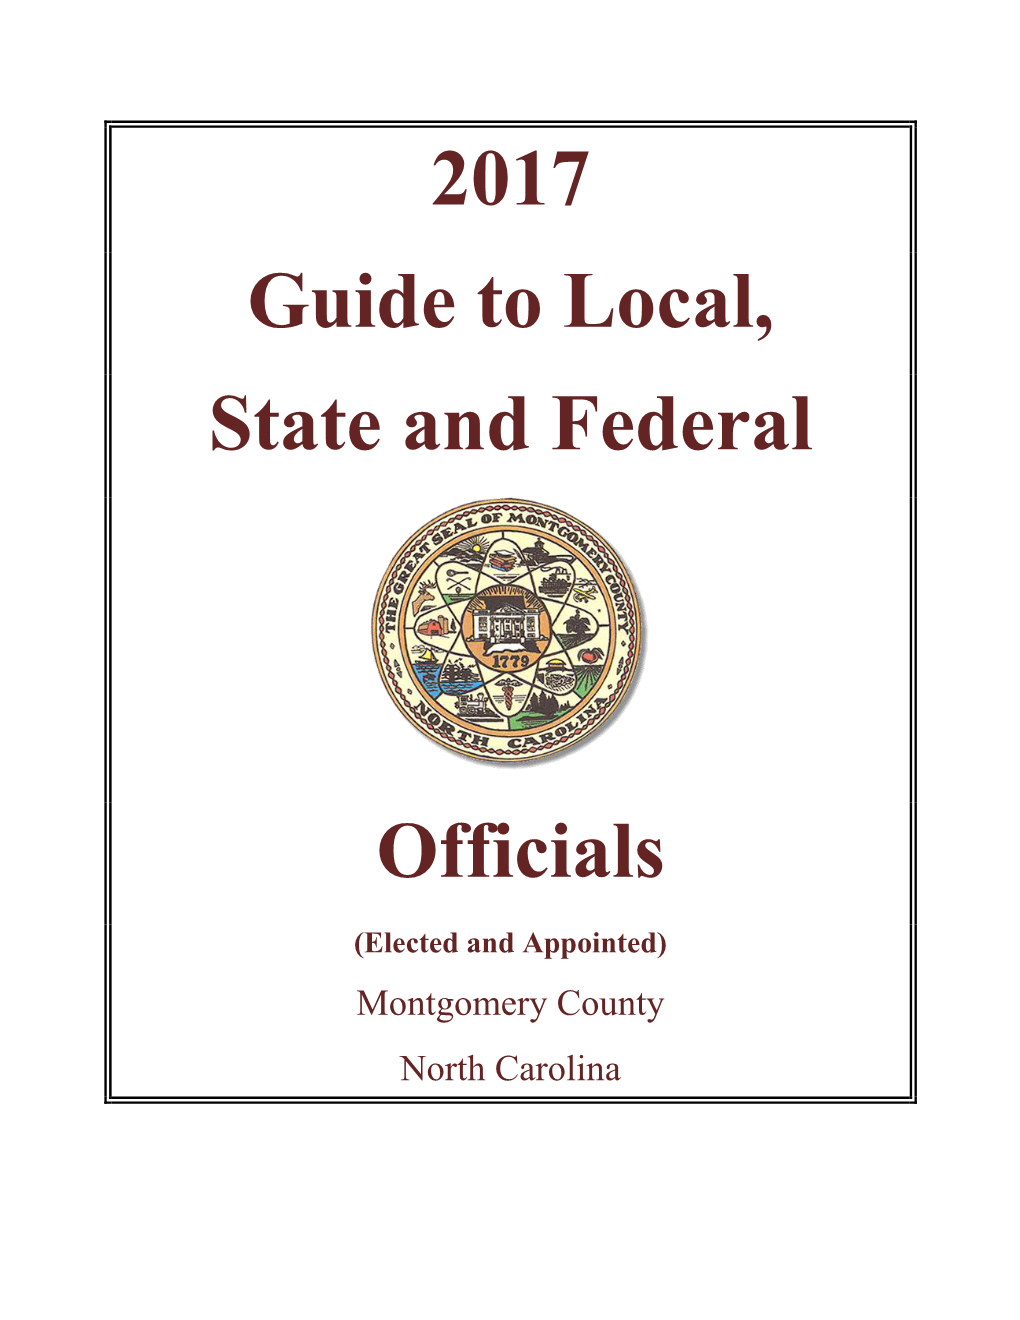 2017 Guide to Local, State and Federal Officials